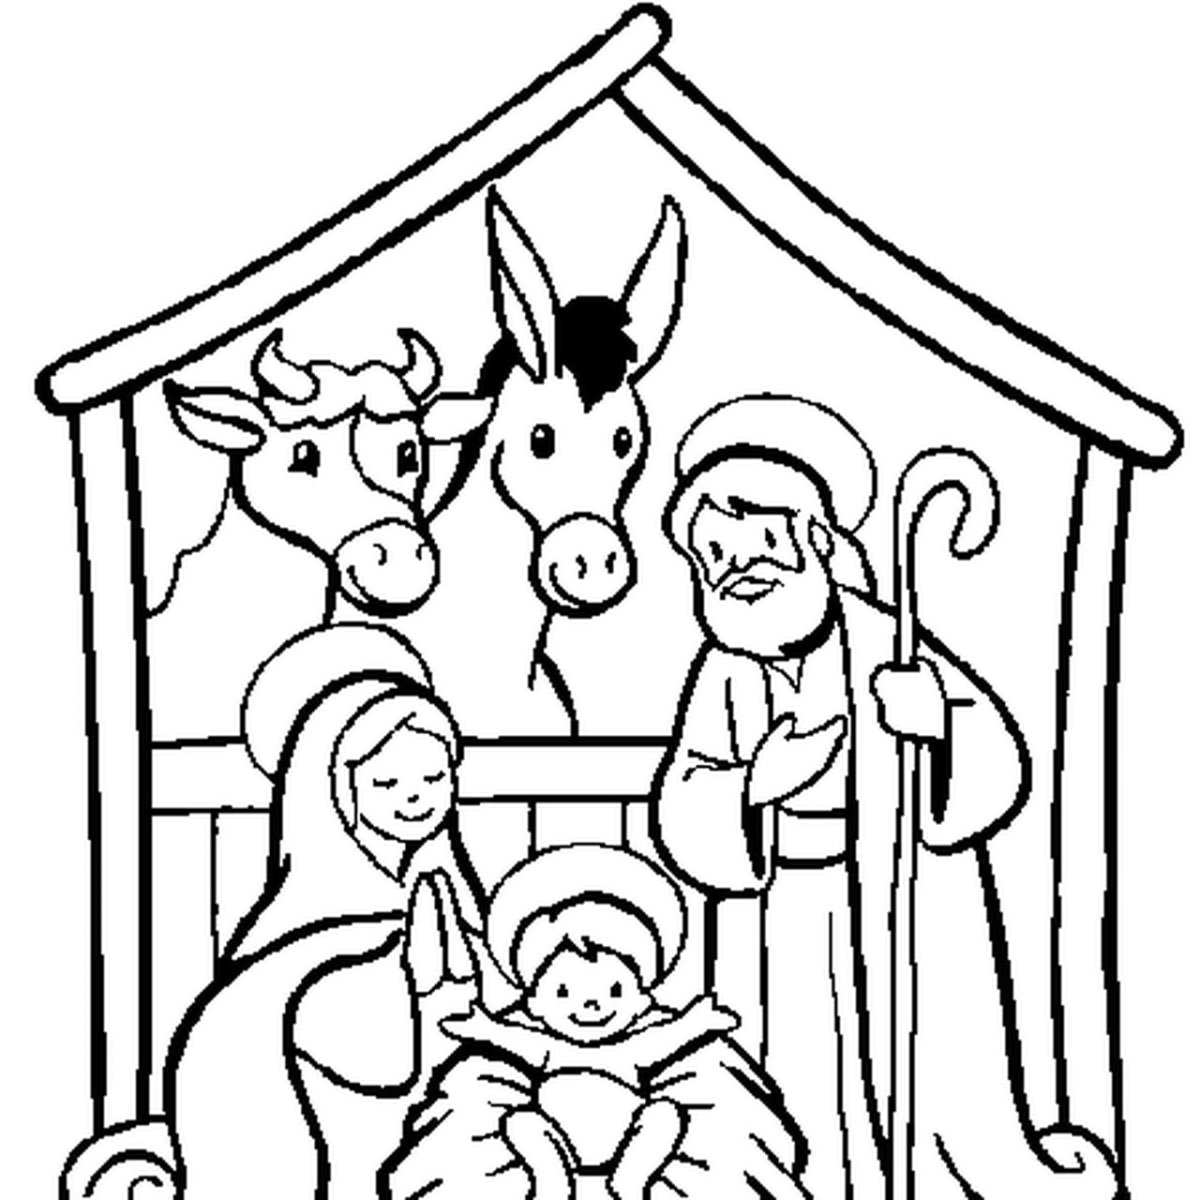 Great Christmas coloring book for kids